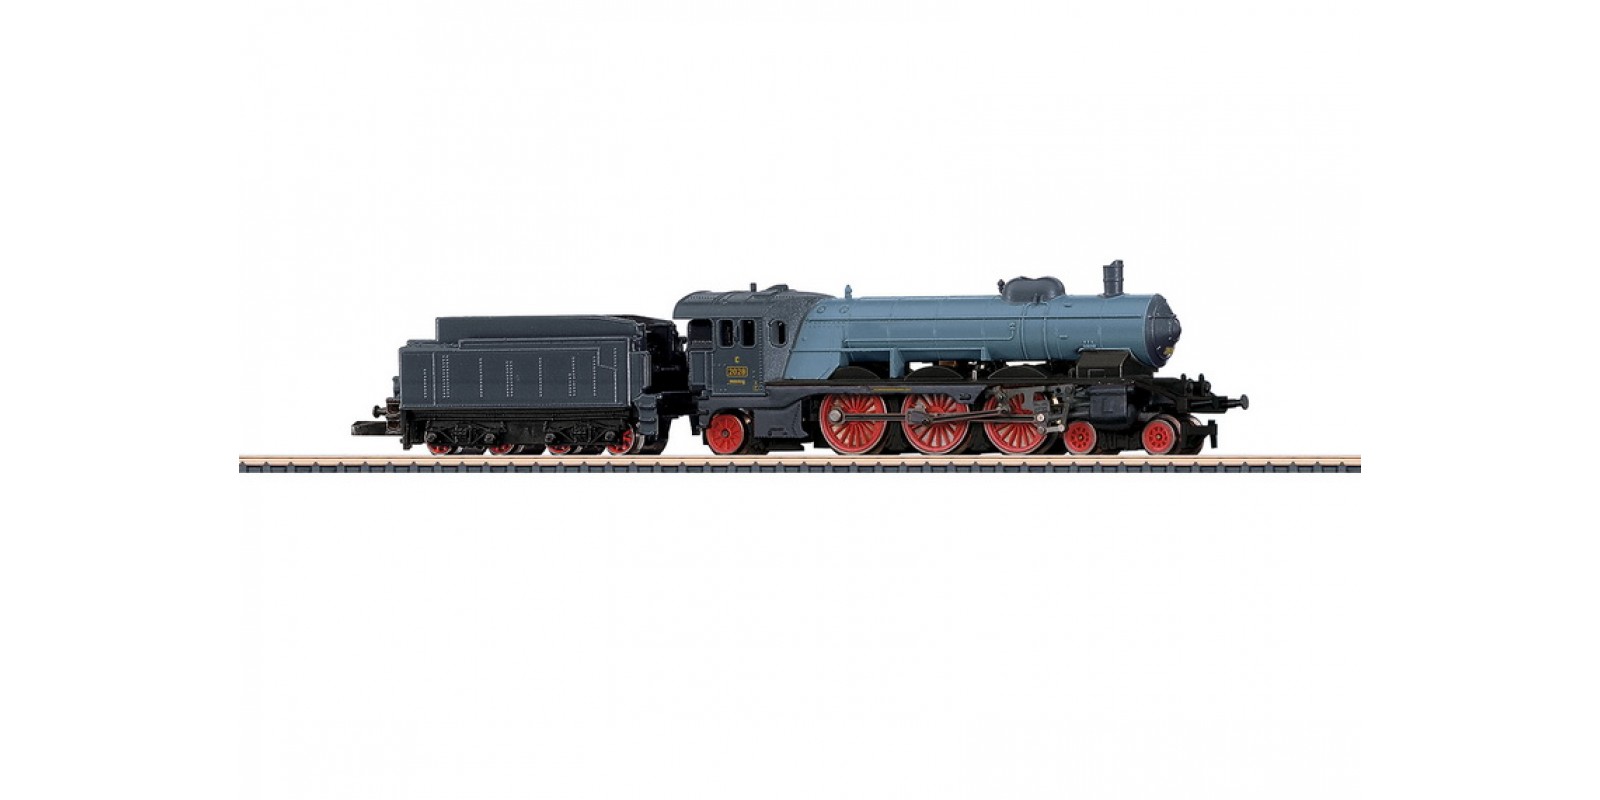 88185 Class C Express Steam Locomotive with a Tender